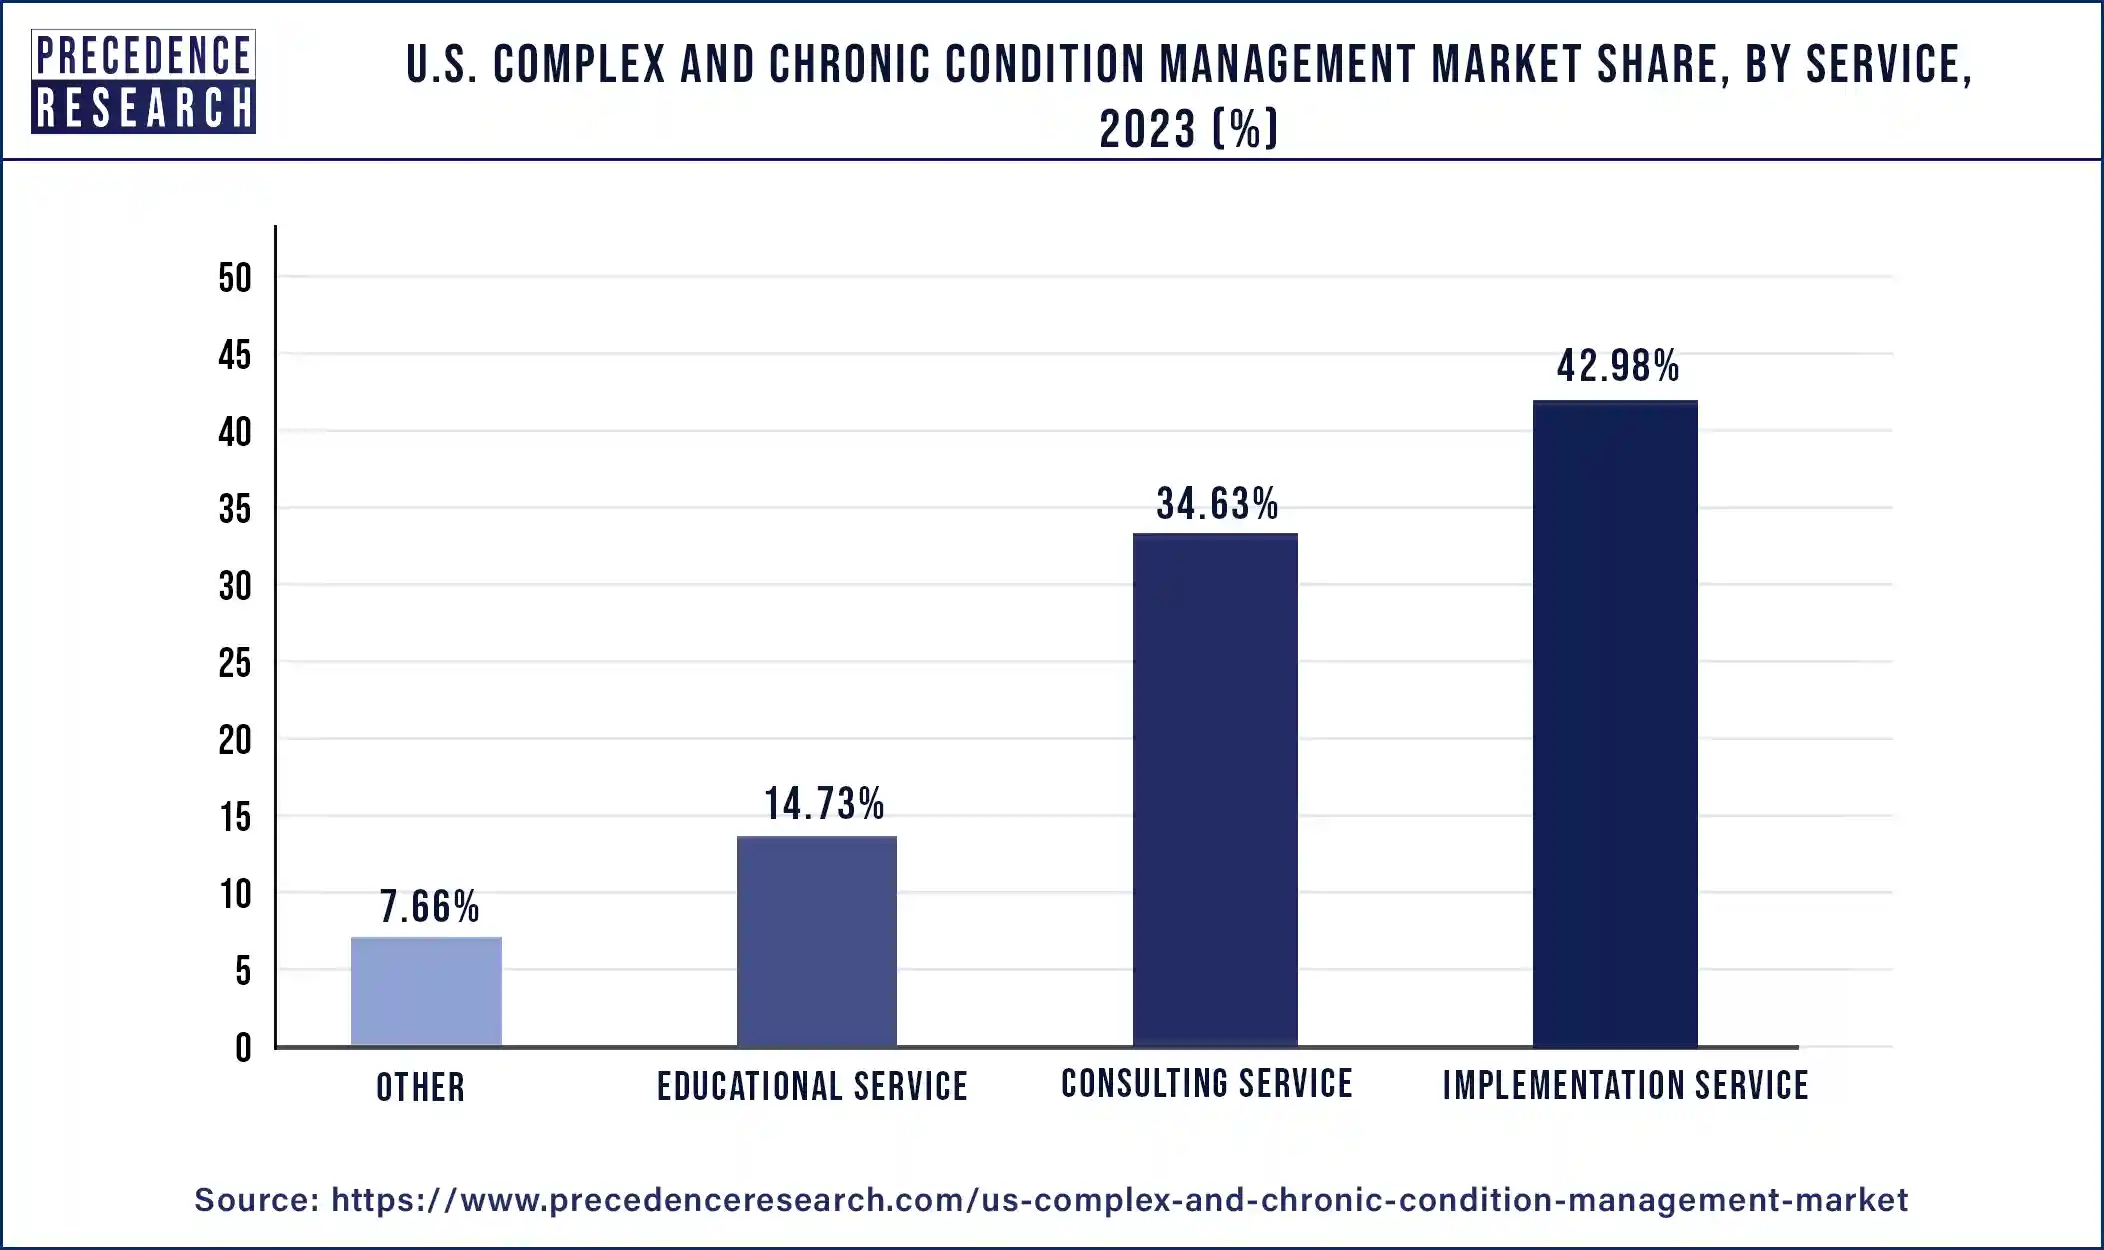 U.S. Complex and Chronic Condition Management Market Share, By Service, 2023 (%)